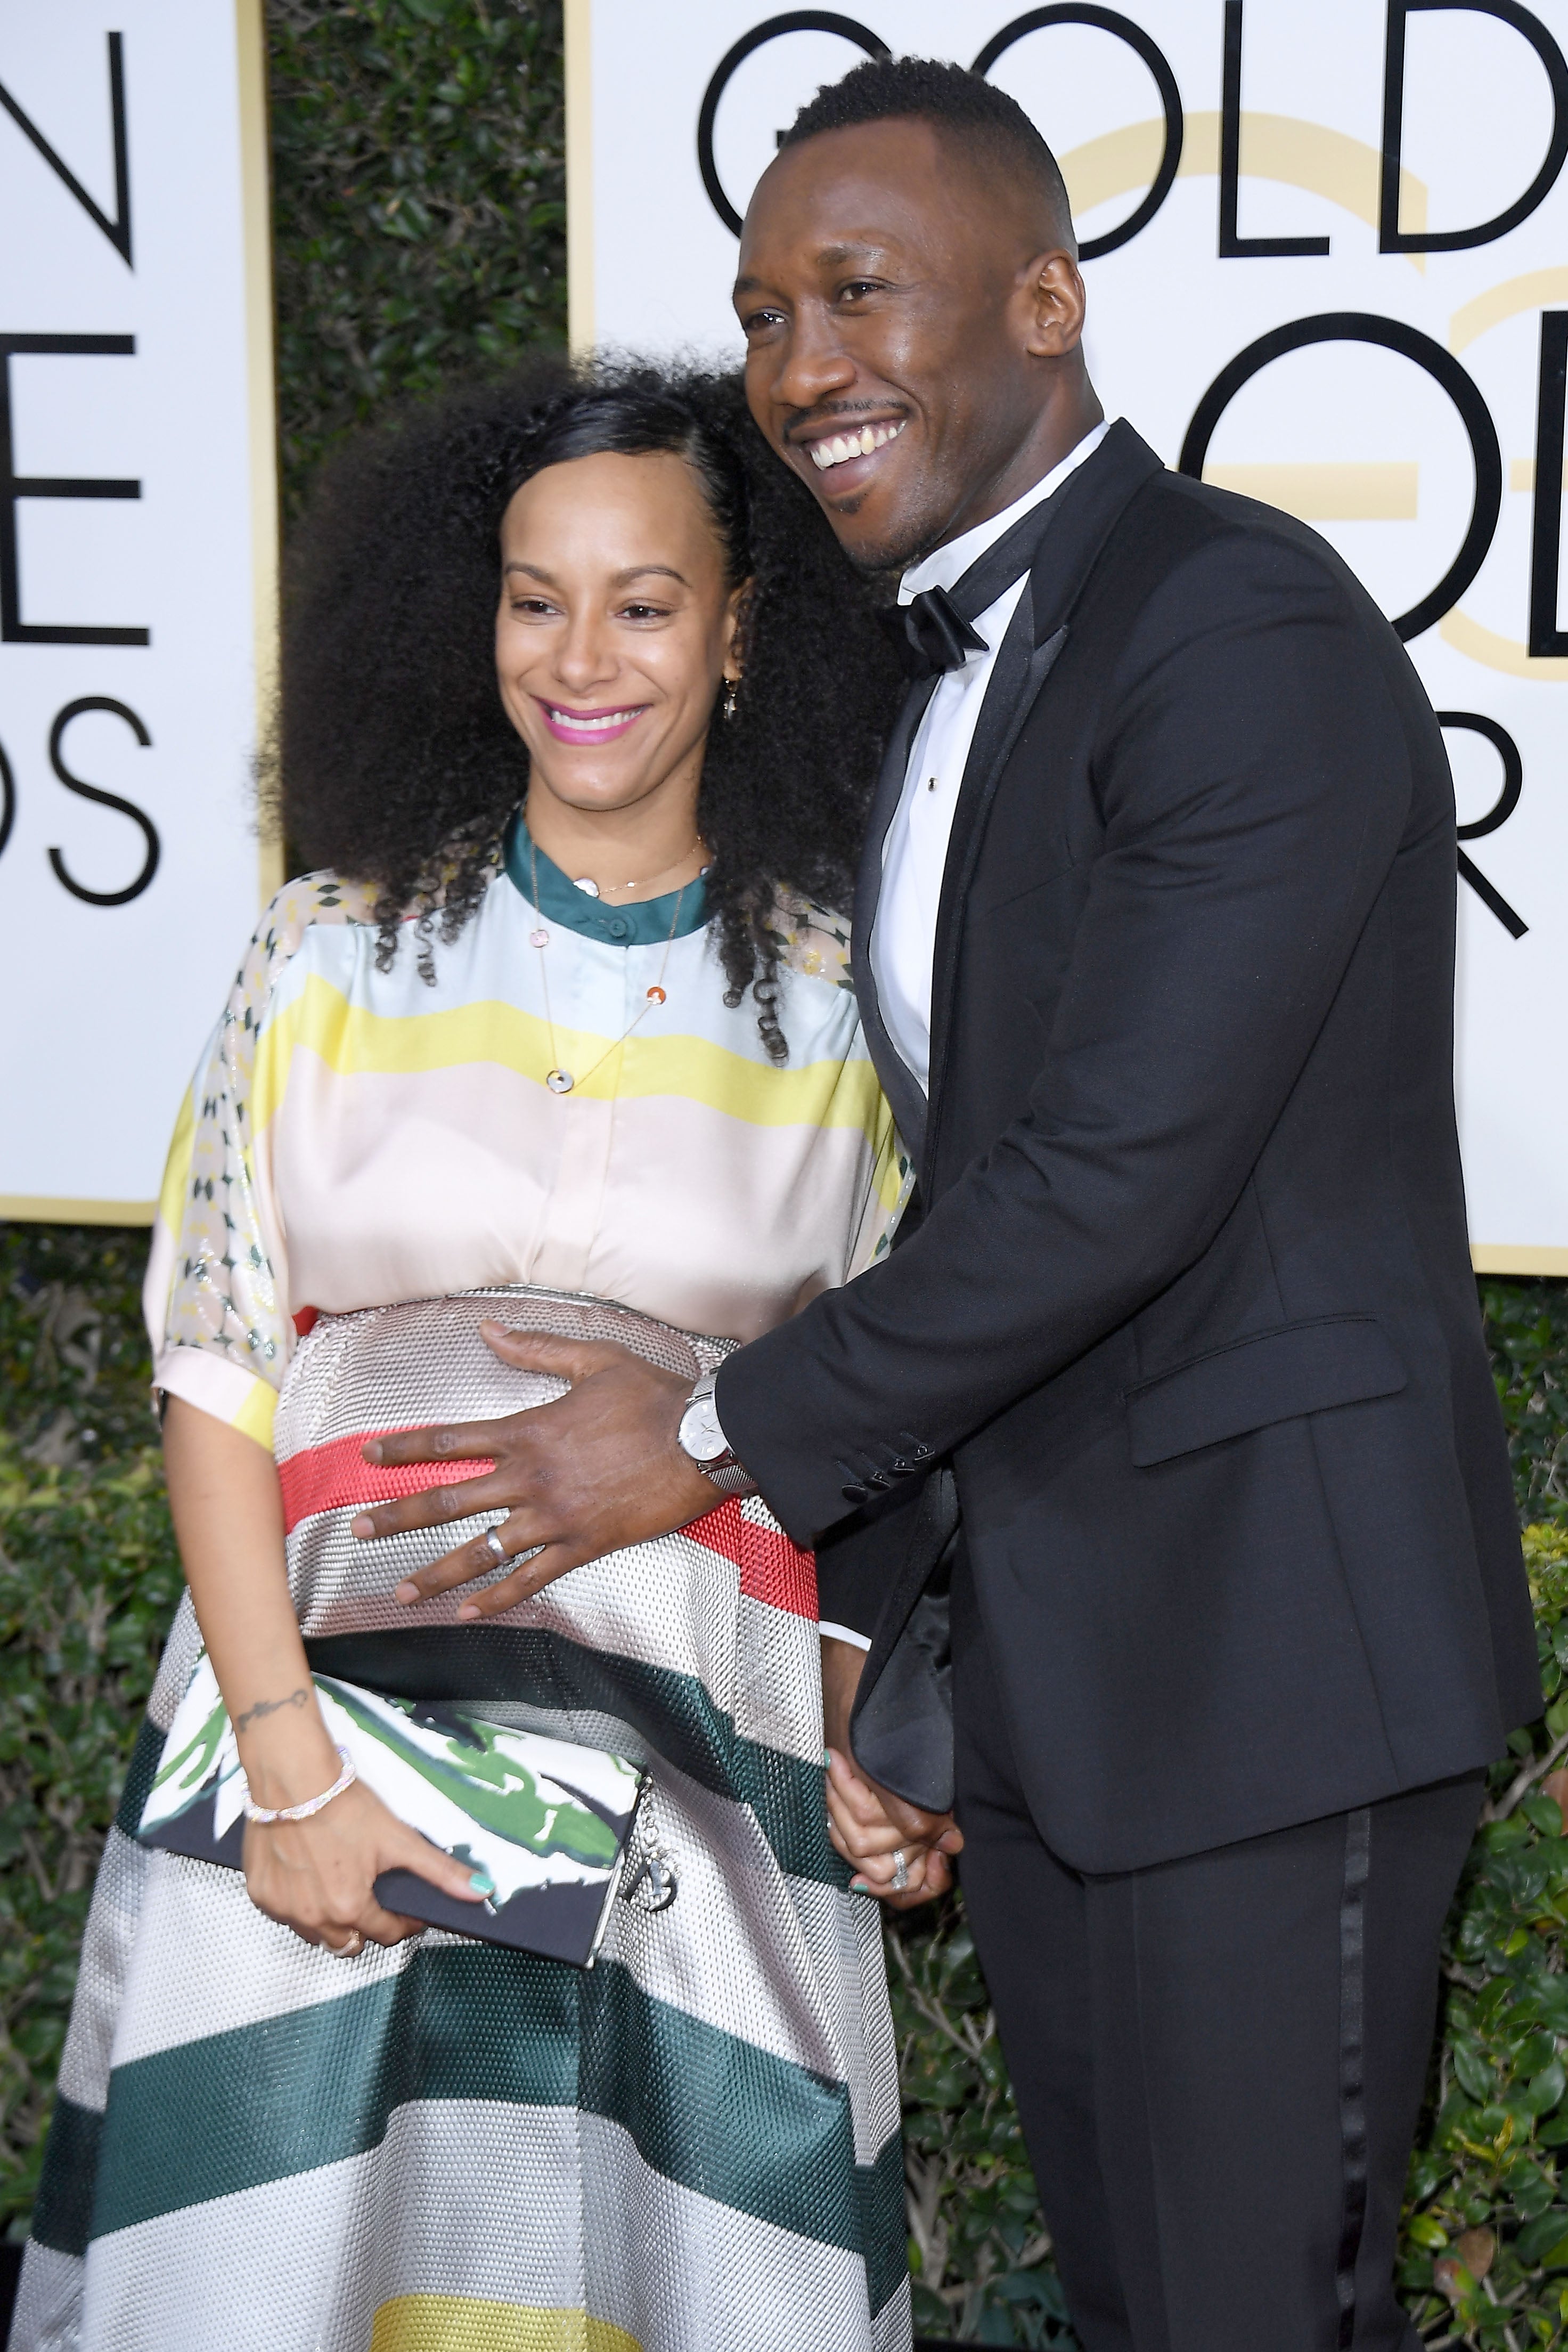 Celebs with black spouses